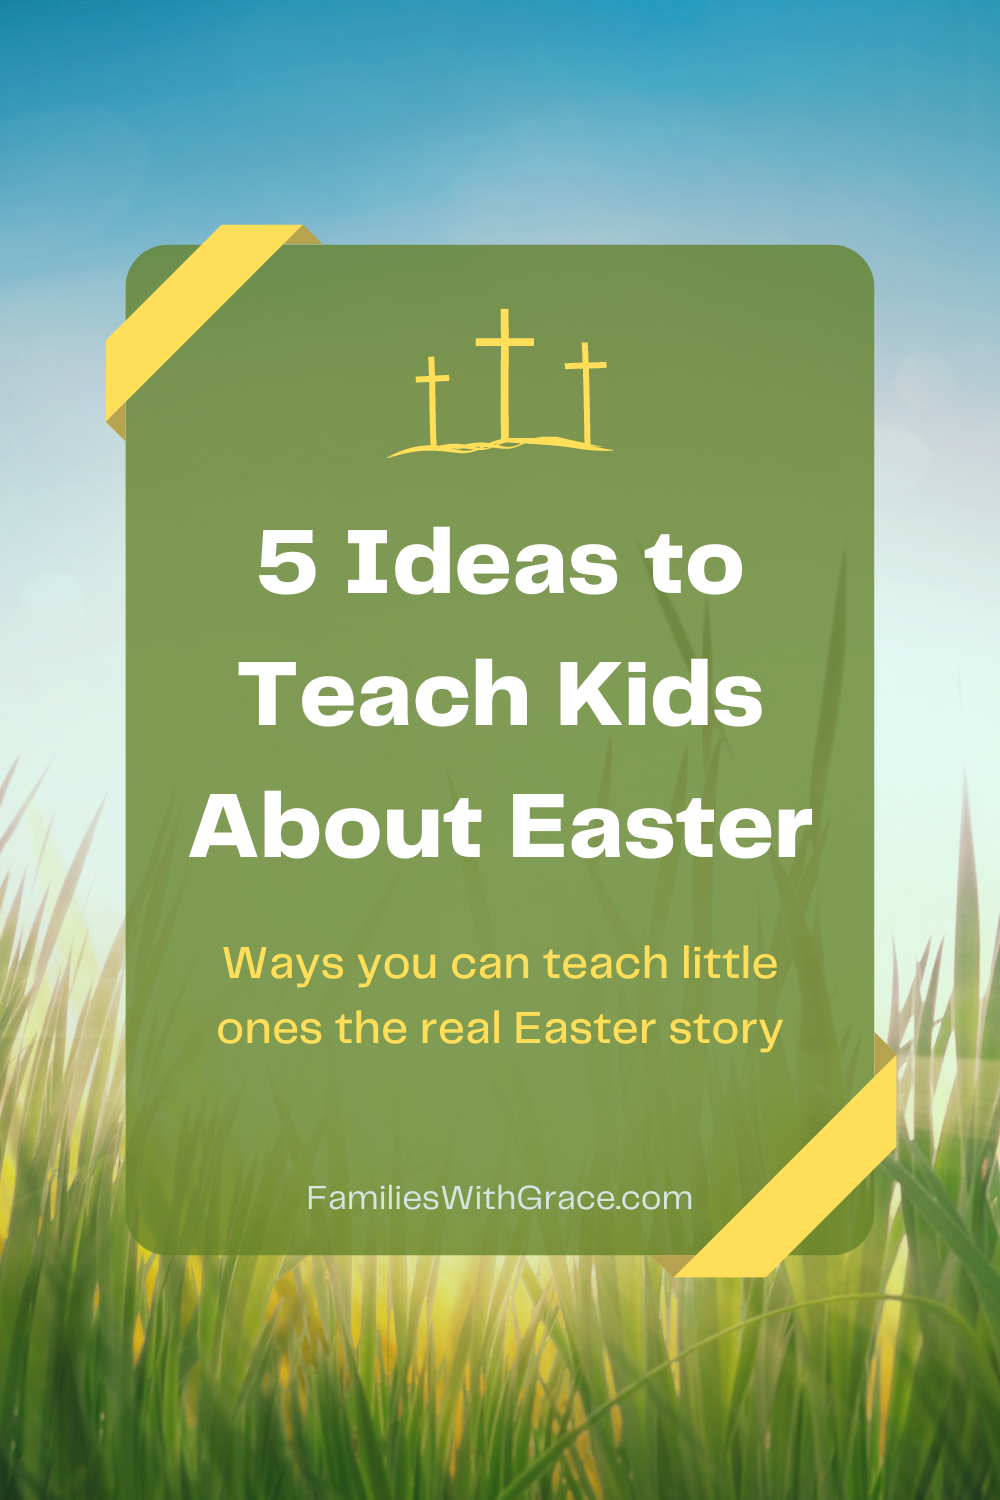 Ideas to teach kids about Easter